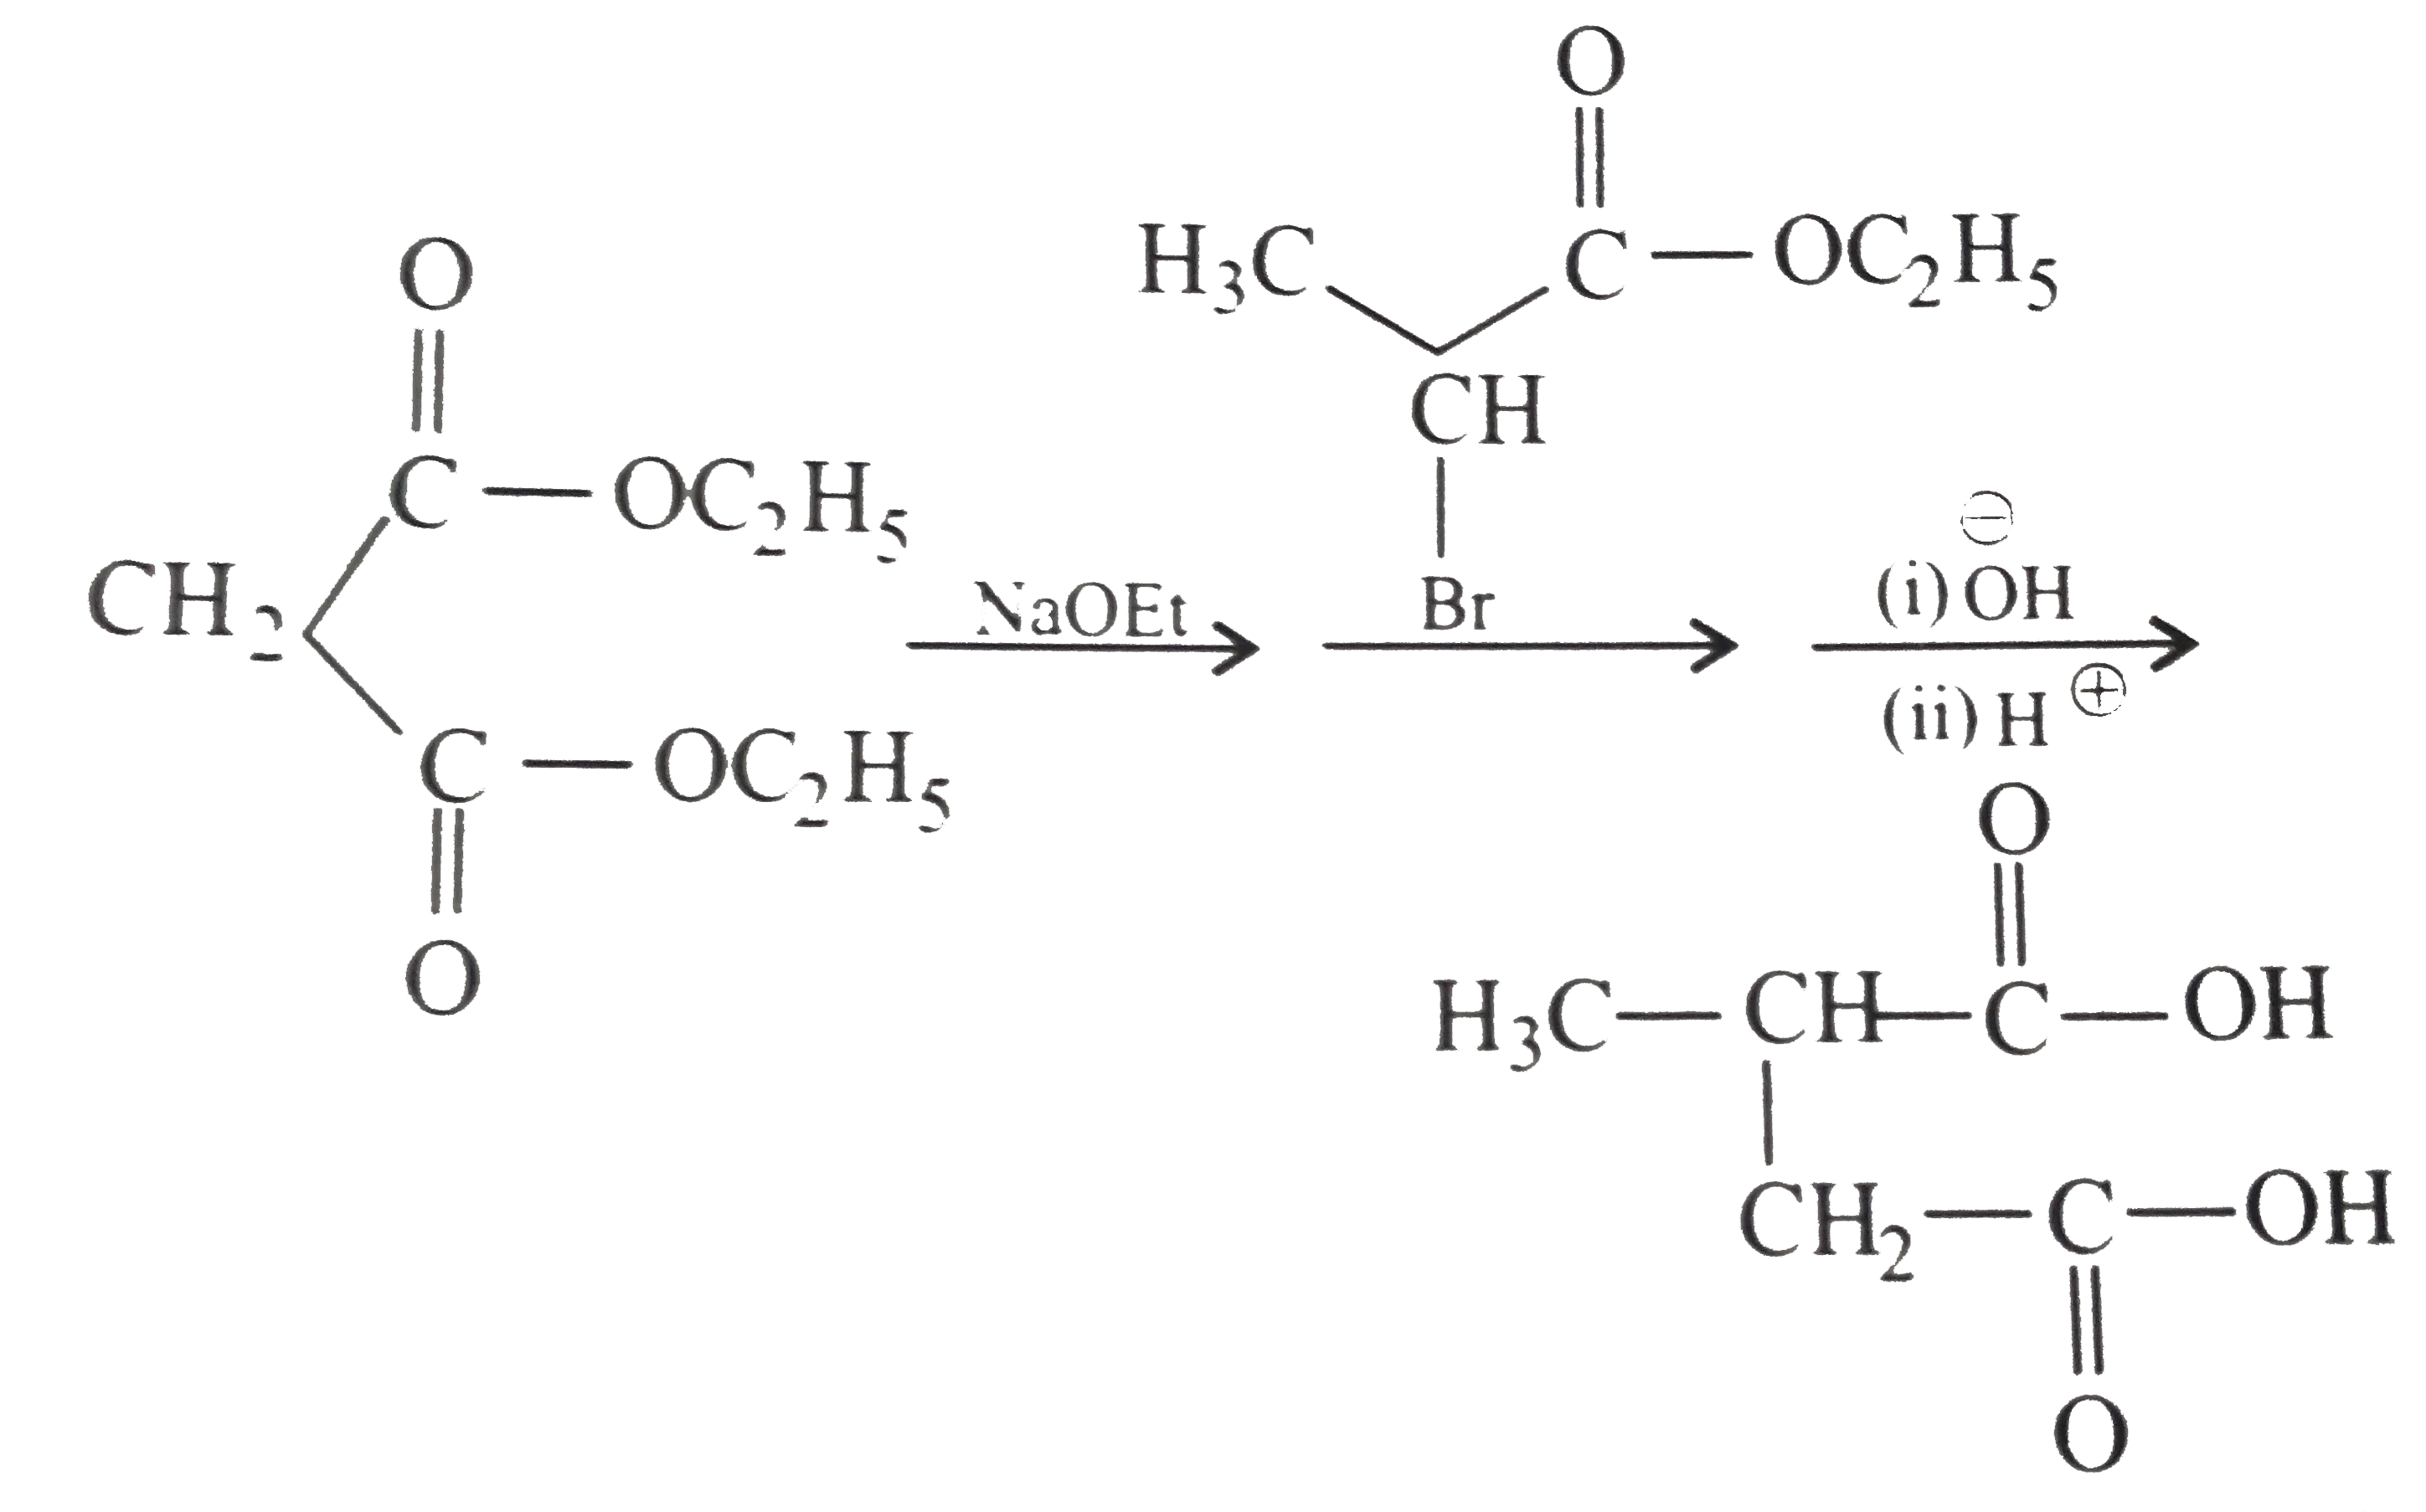 Explain briefly the formation of products giving the strcutures of the intermediates.   .